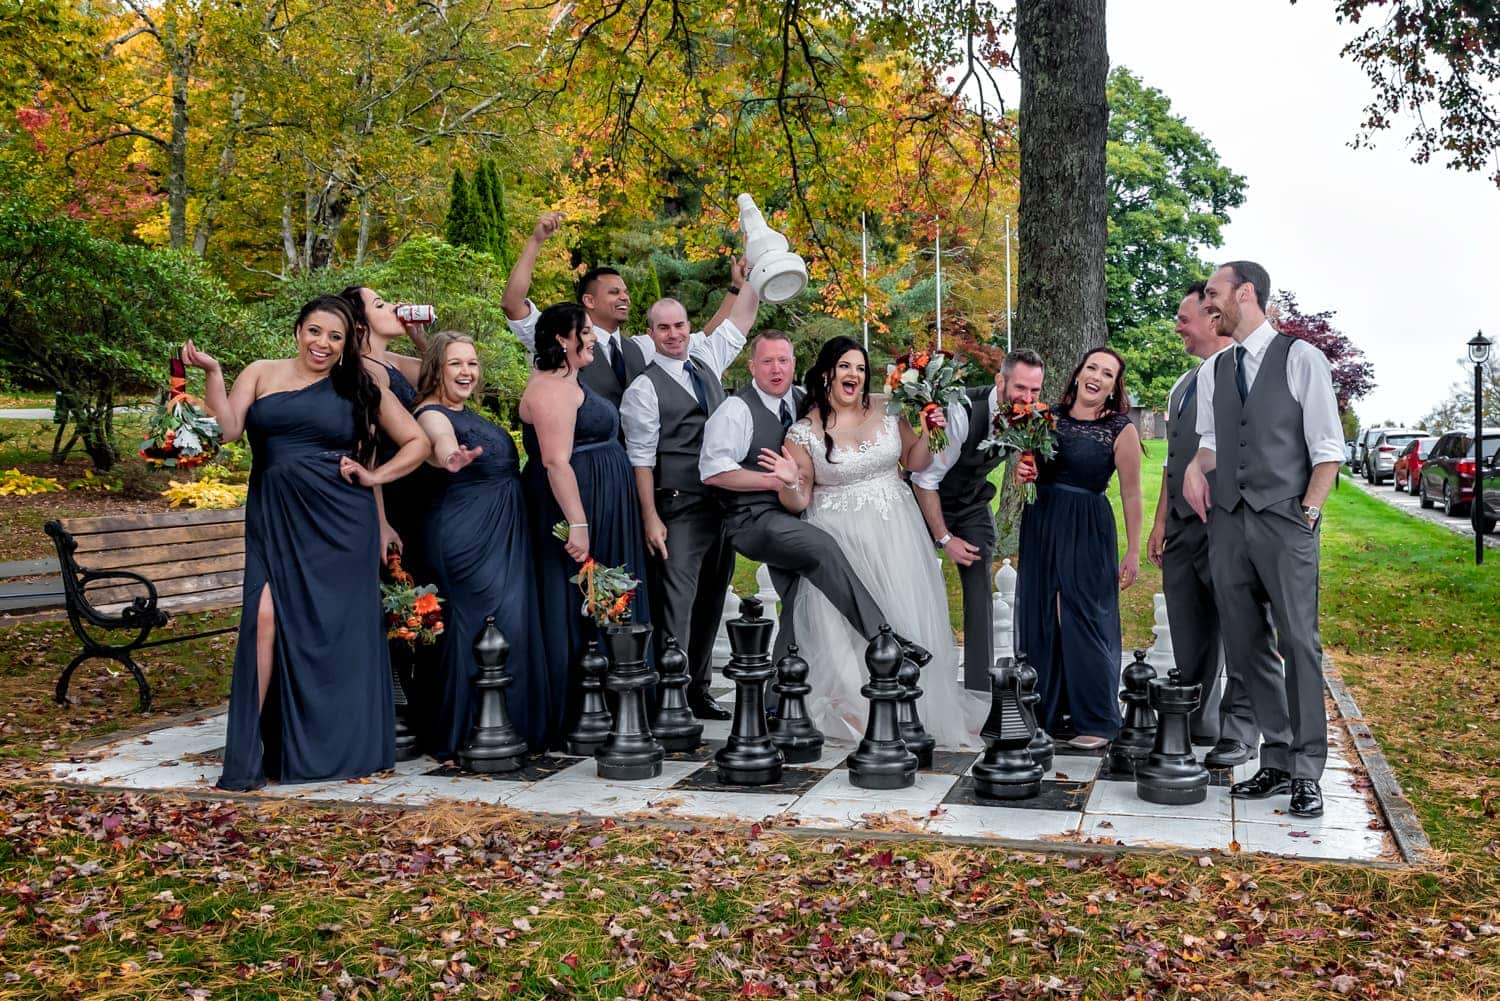 Funny wedding party photos at a Digby Pines wedding with the bride and groom on a giant chessboard.